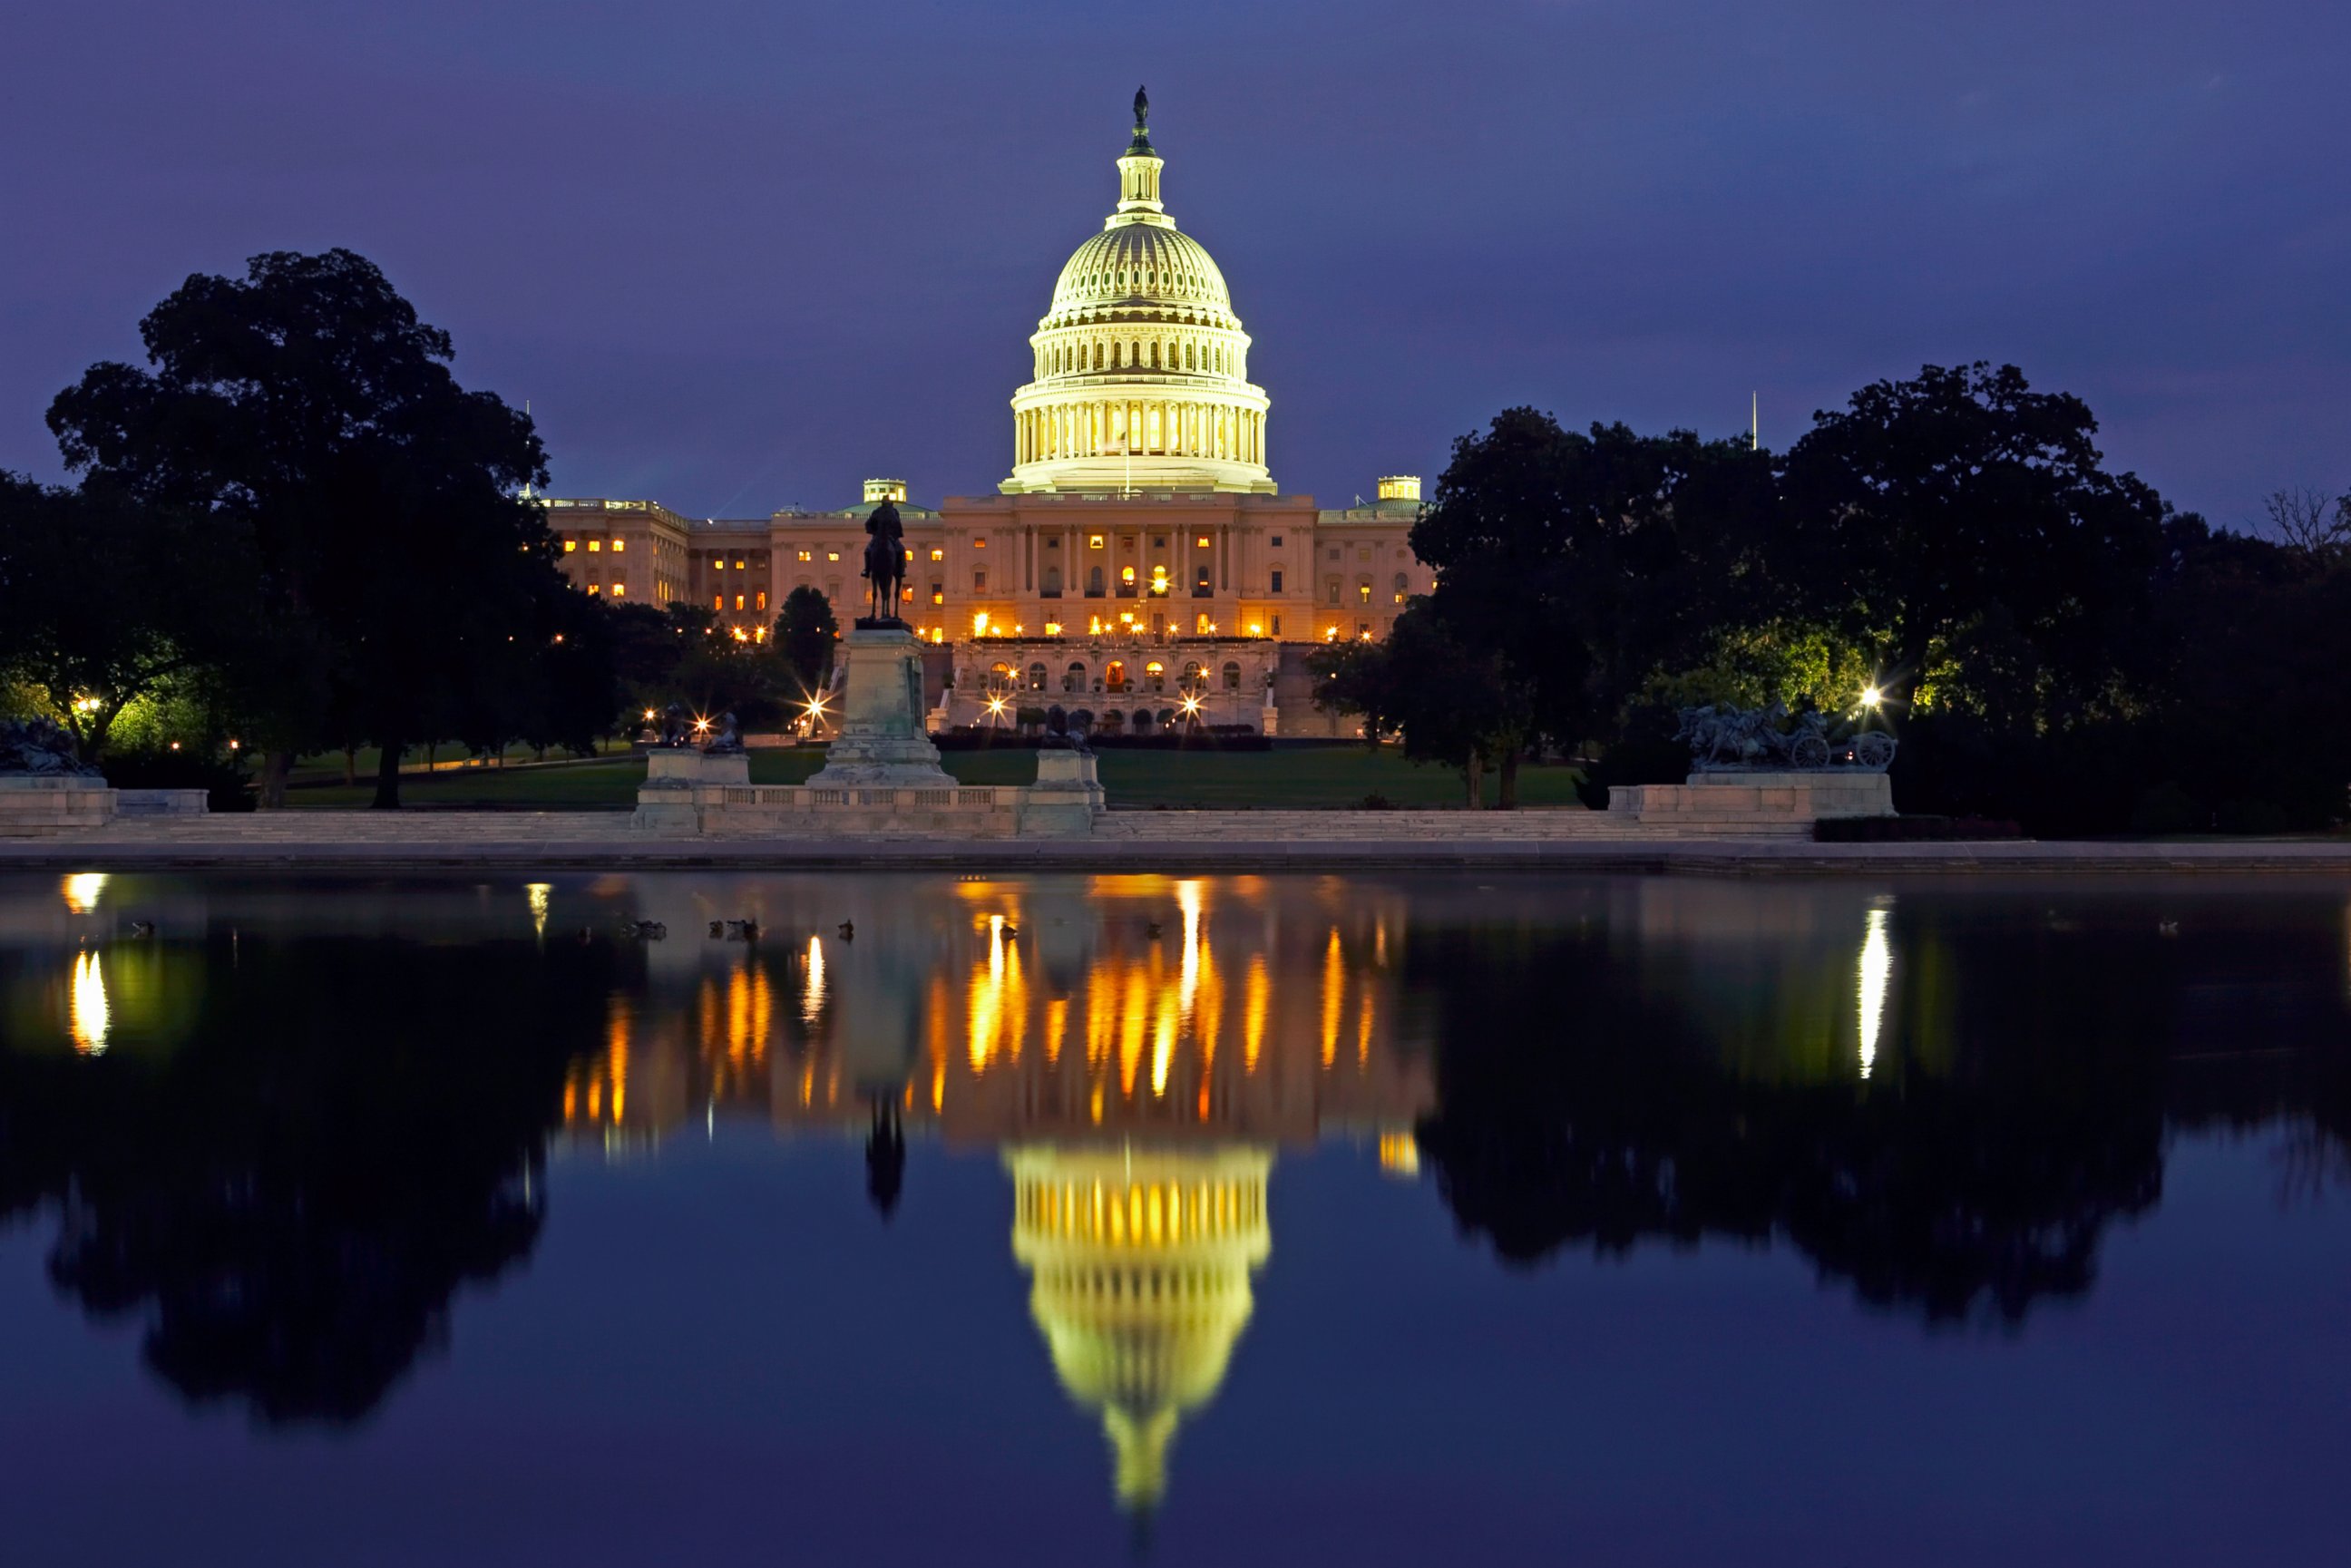 PHOTO: In this file photo, the U.S. Capitol building is pictured in Washington D.C. 